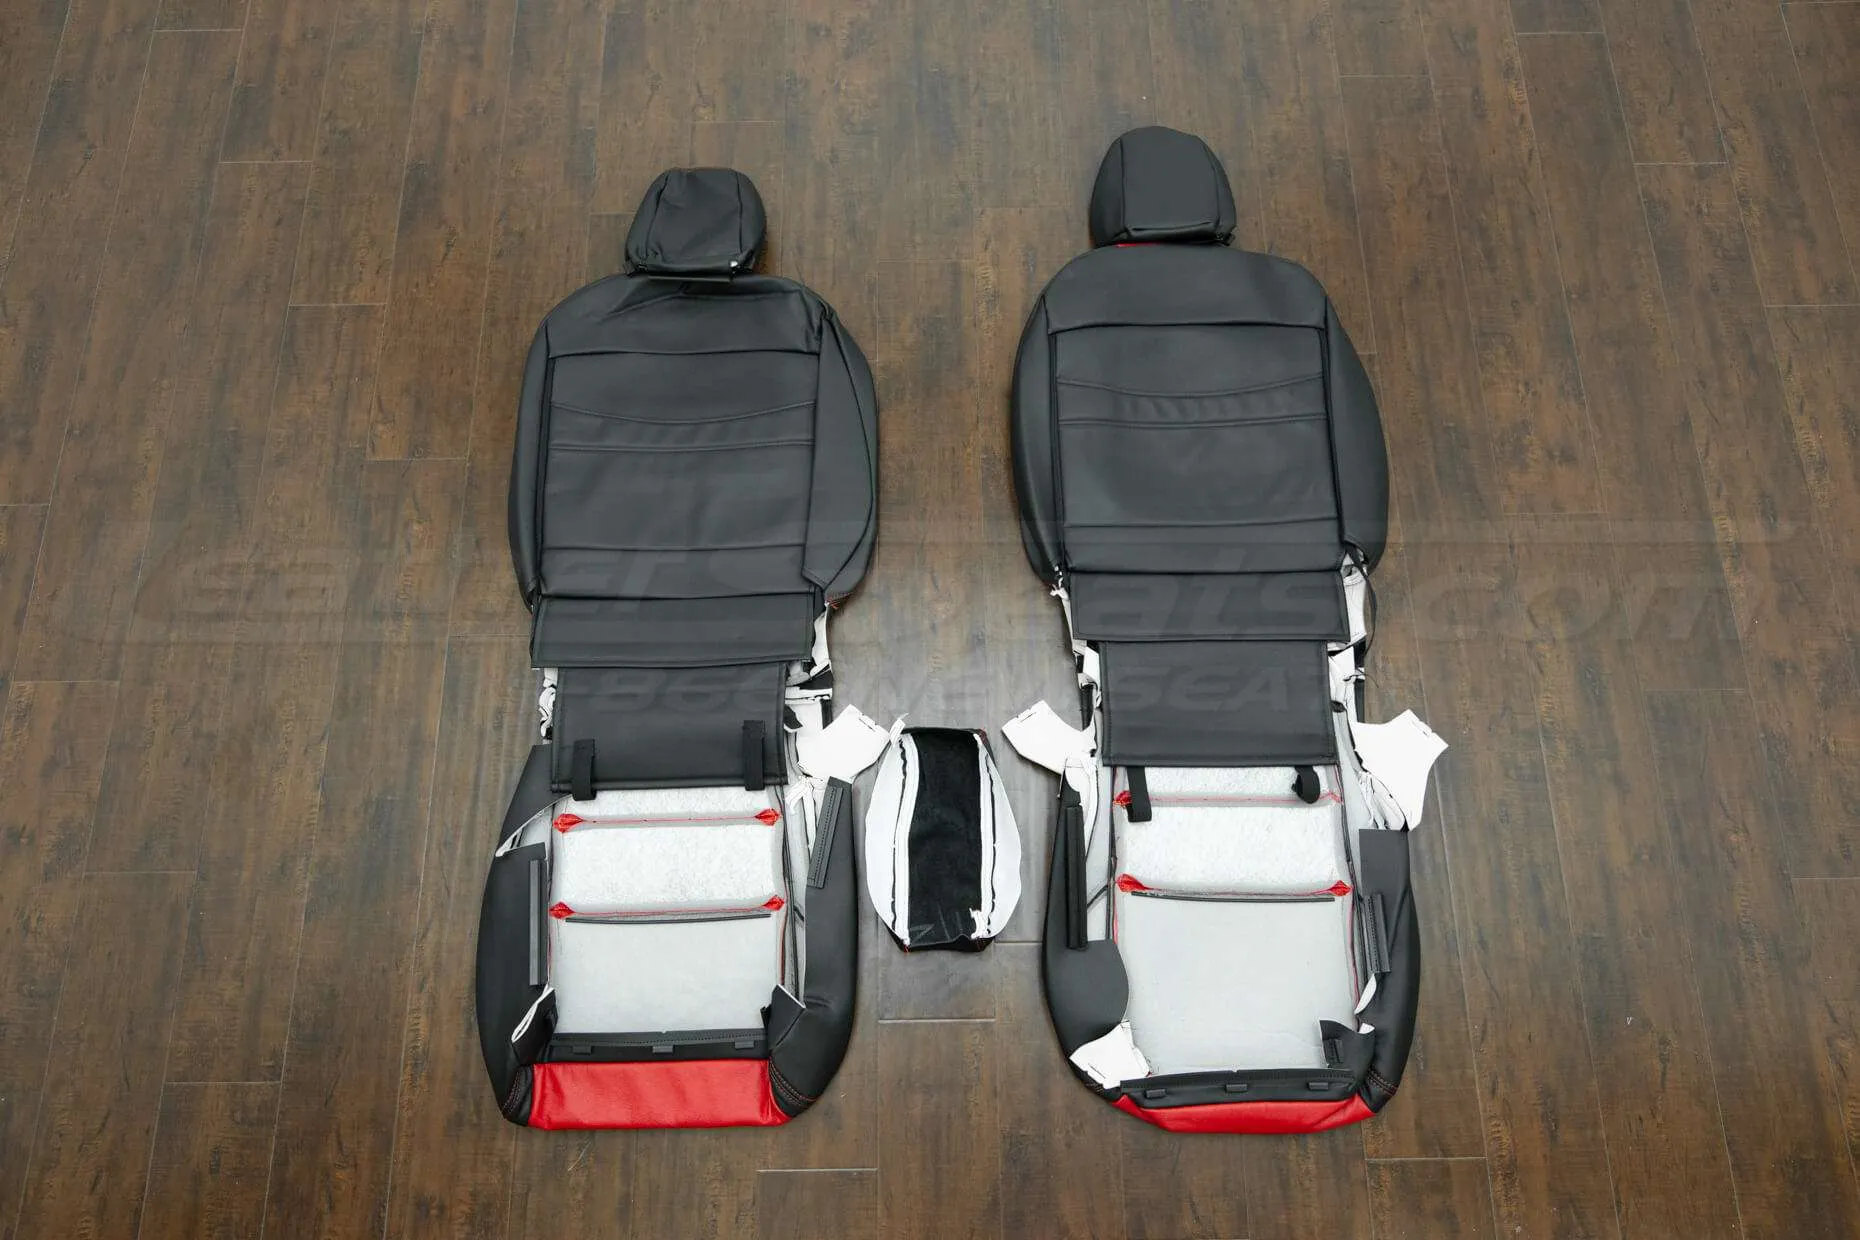 Honda Civic Leather Kit - Black & Bright Red - Back view of front seats & console lid cover